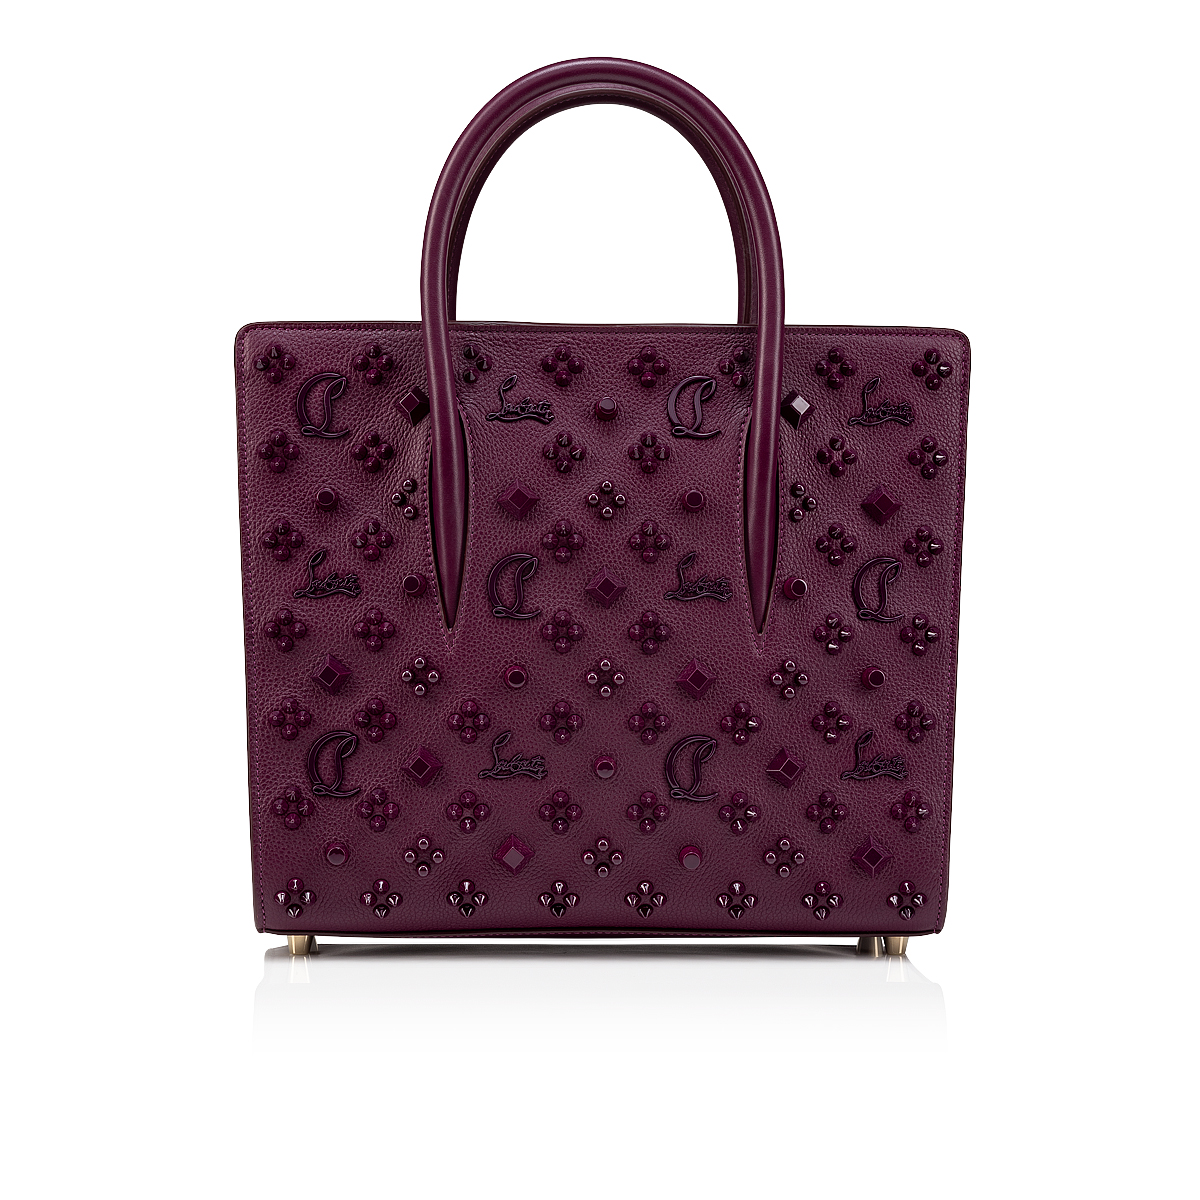 Are the Louis Vuitton Bags At Dillard's Real? - Jane Marvel